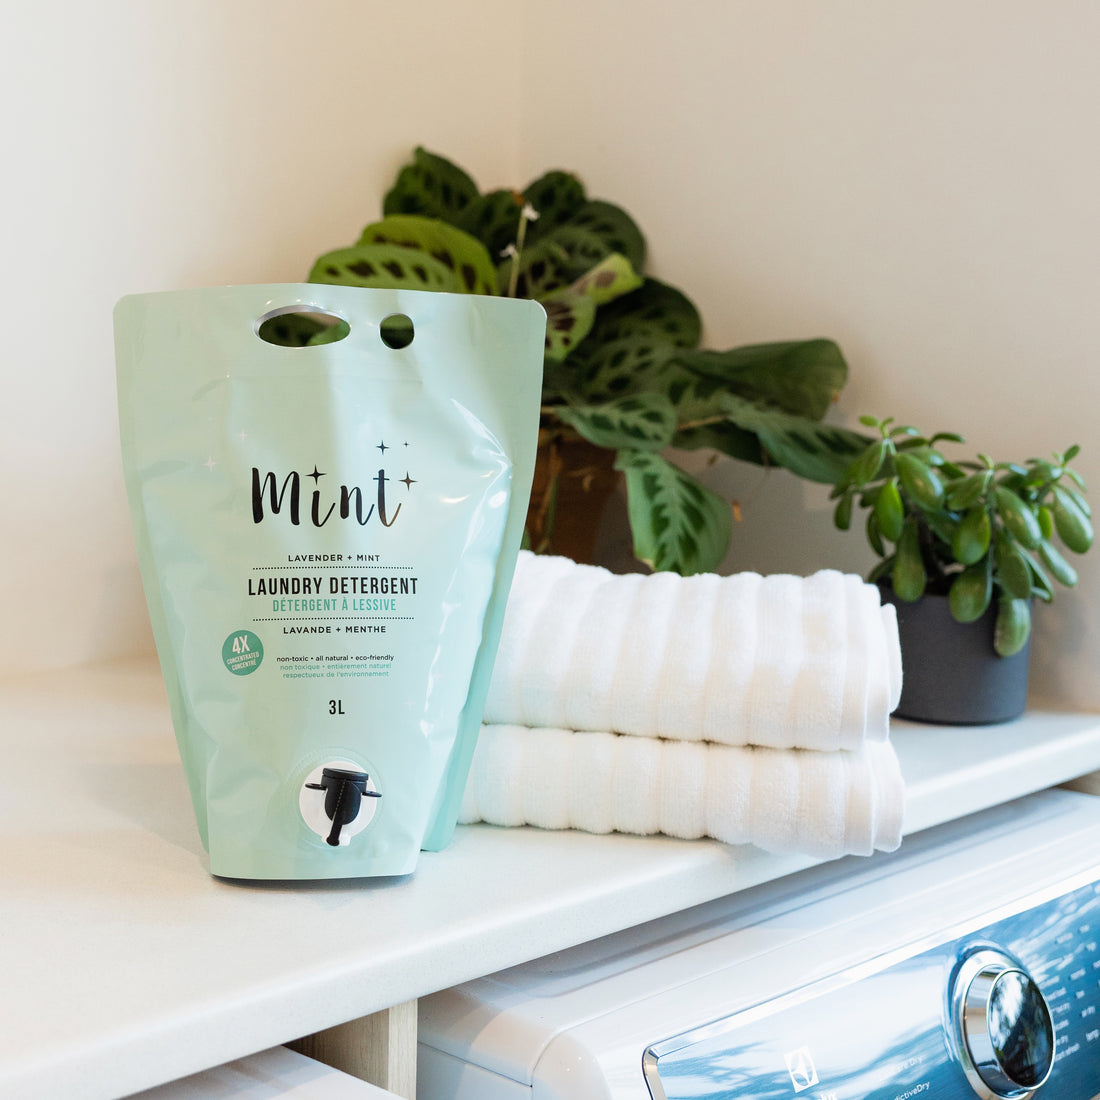 Mint Lavender & Mint Laundry Detergent in a 3L refill pouch with a spout, displayed on a laundry room counter next to folded white towels and a potted plant. The pouch highlights its natural, non-toxic, and eco-friendly ingredients.